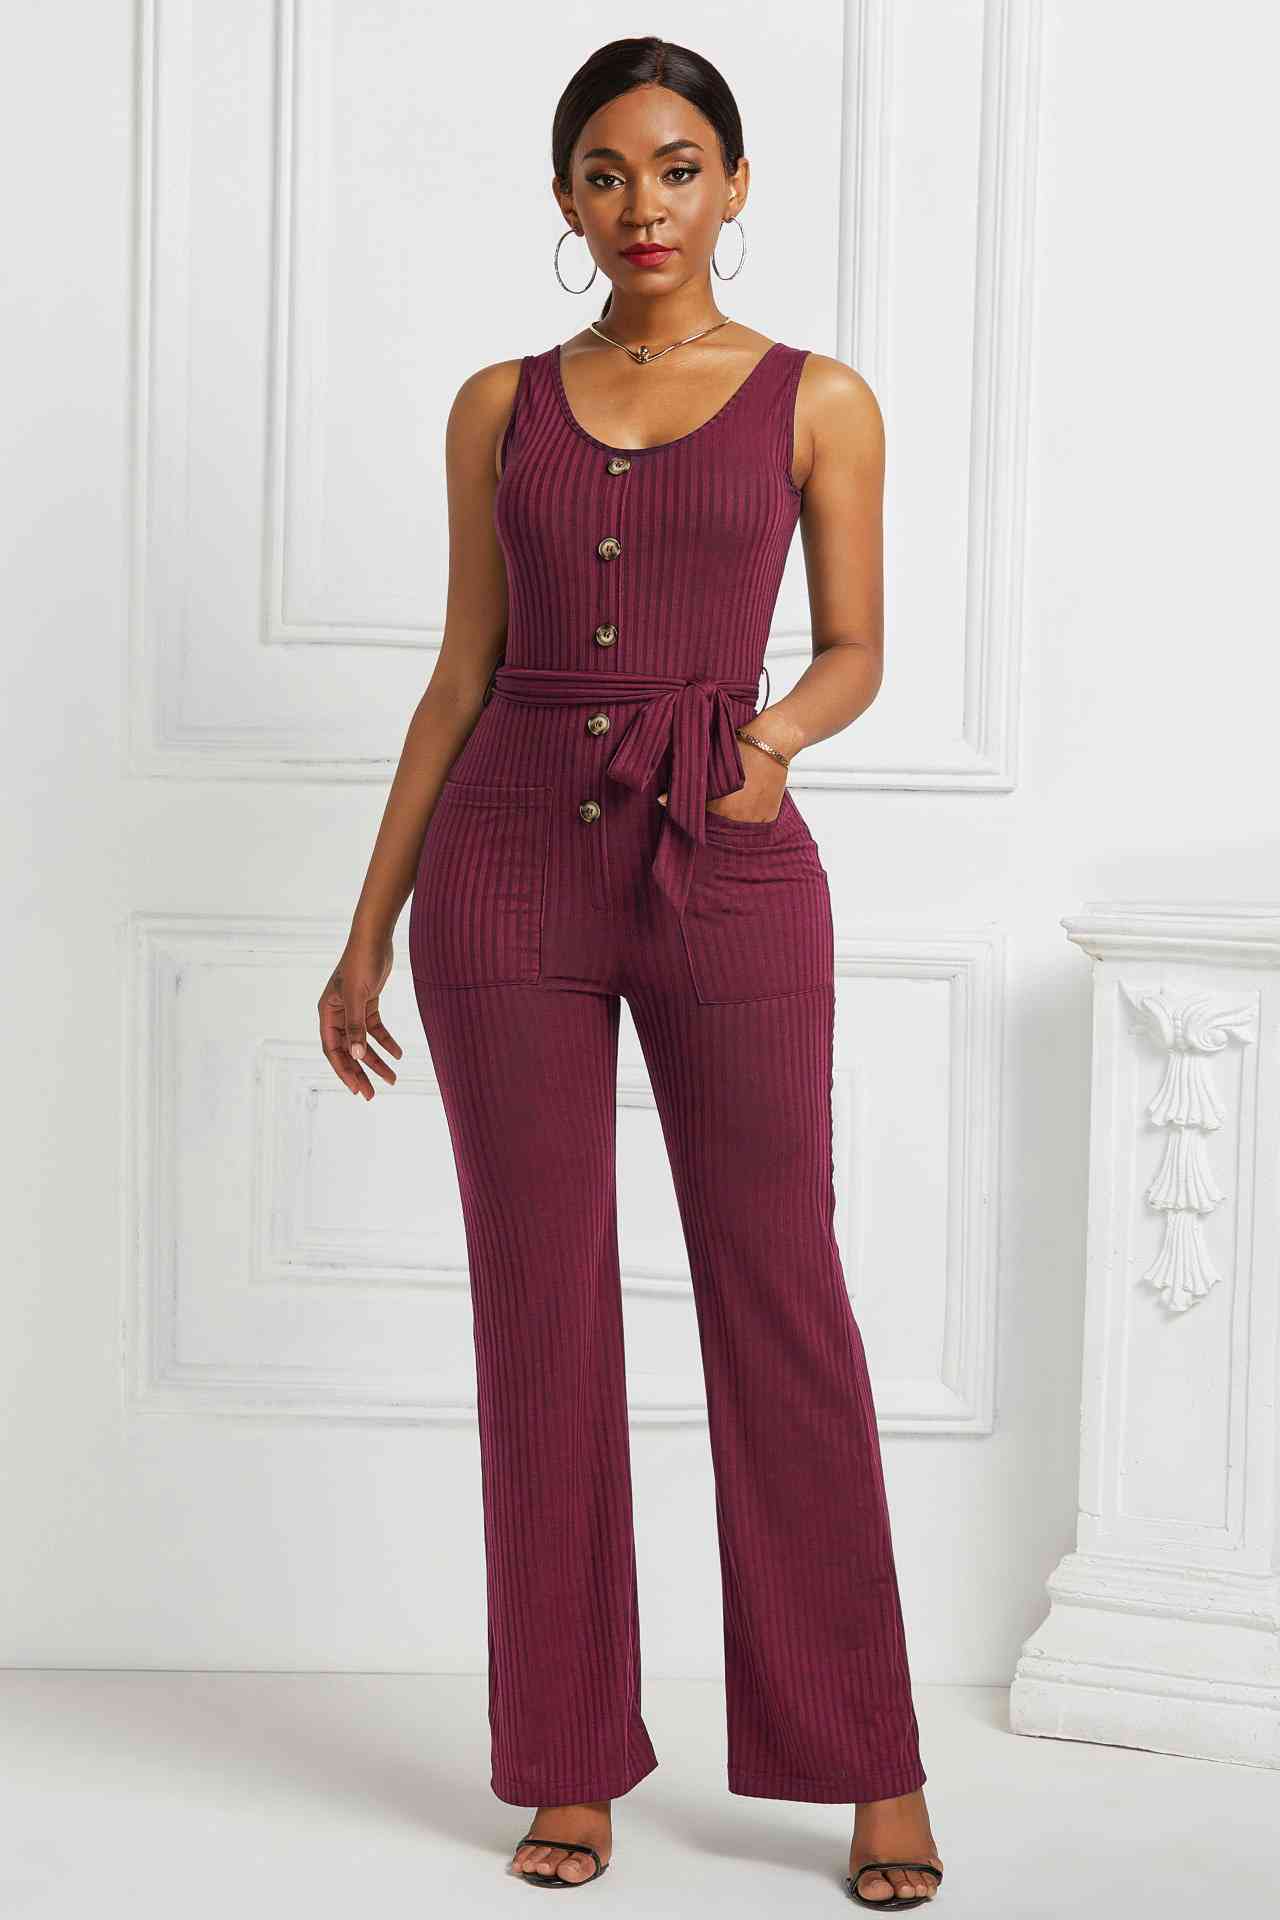 Button Detail Tie Waist Jumpsuit with Pockets - Wine / S Apparel & Accessories Girl Code